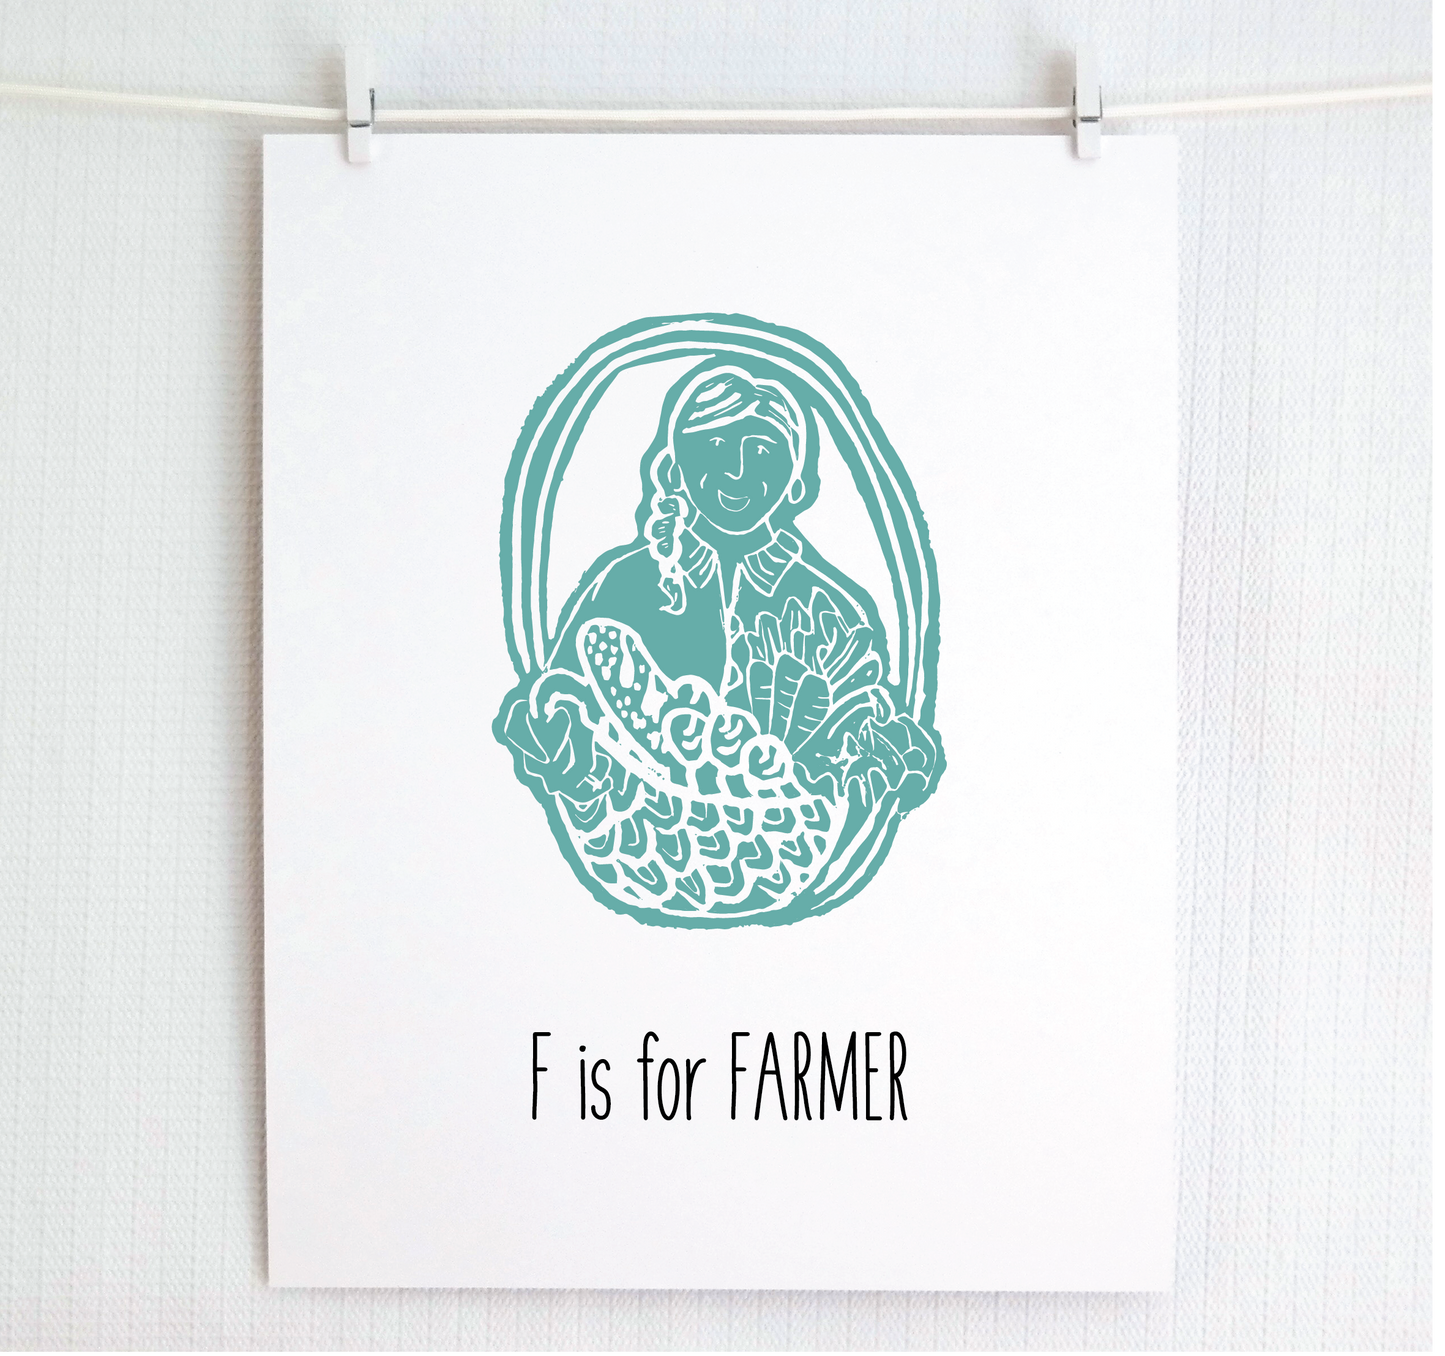 F is for Farmer